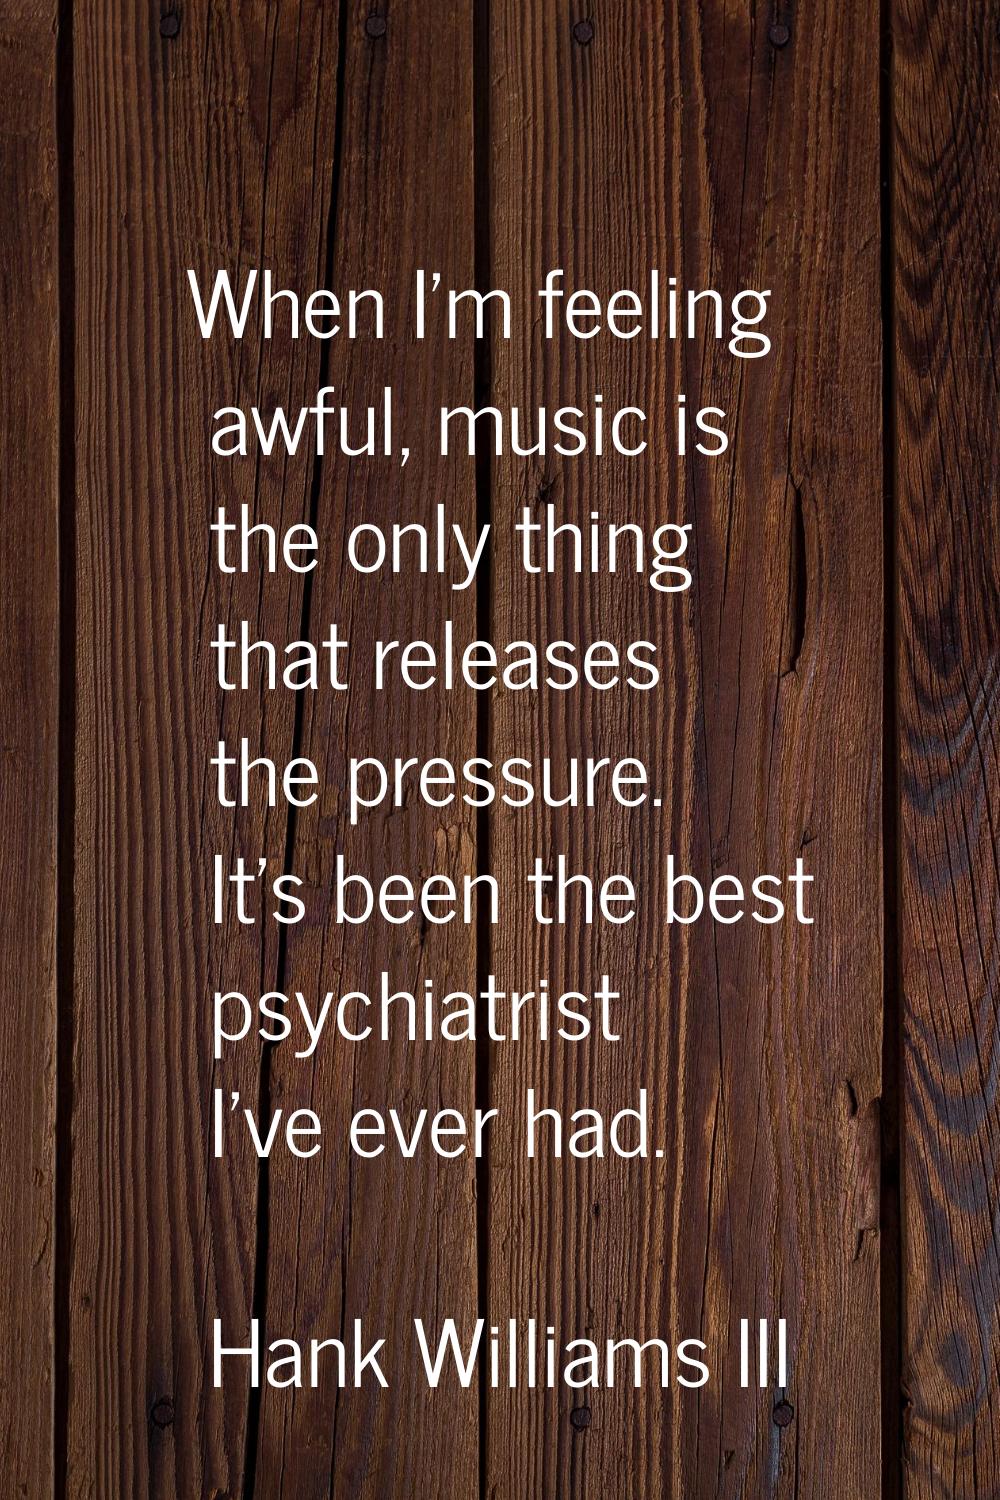 When I'm feeling awful, music is the only thing that releases the pressure. It's been the best psyc